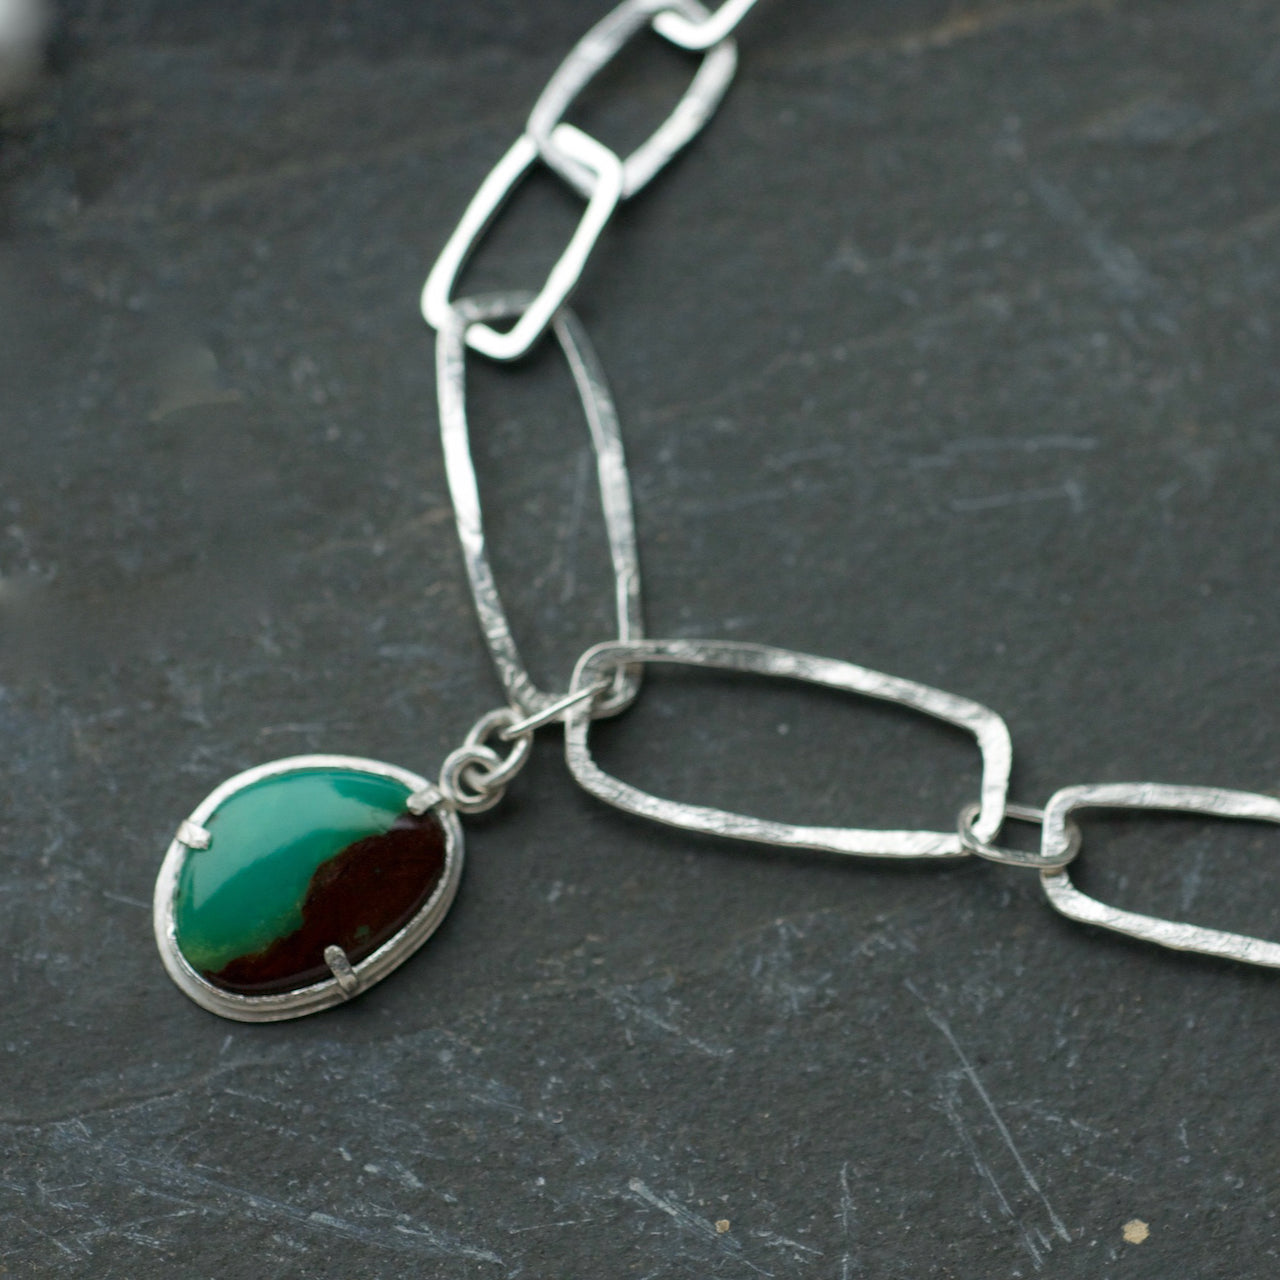 Monolith shaped silver chain link necklace with Chrysoprase Pendant by artist Lucy Spink.